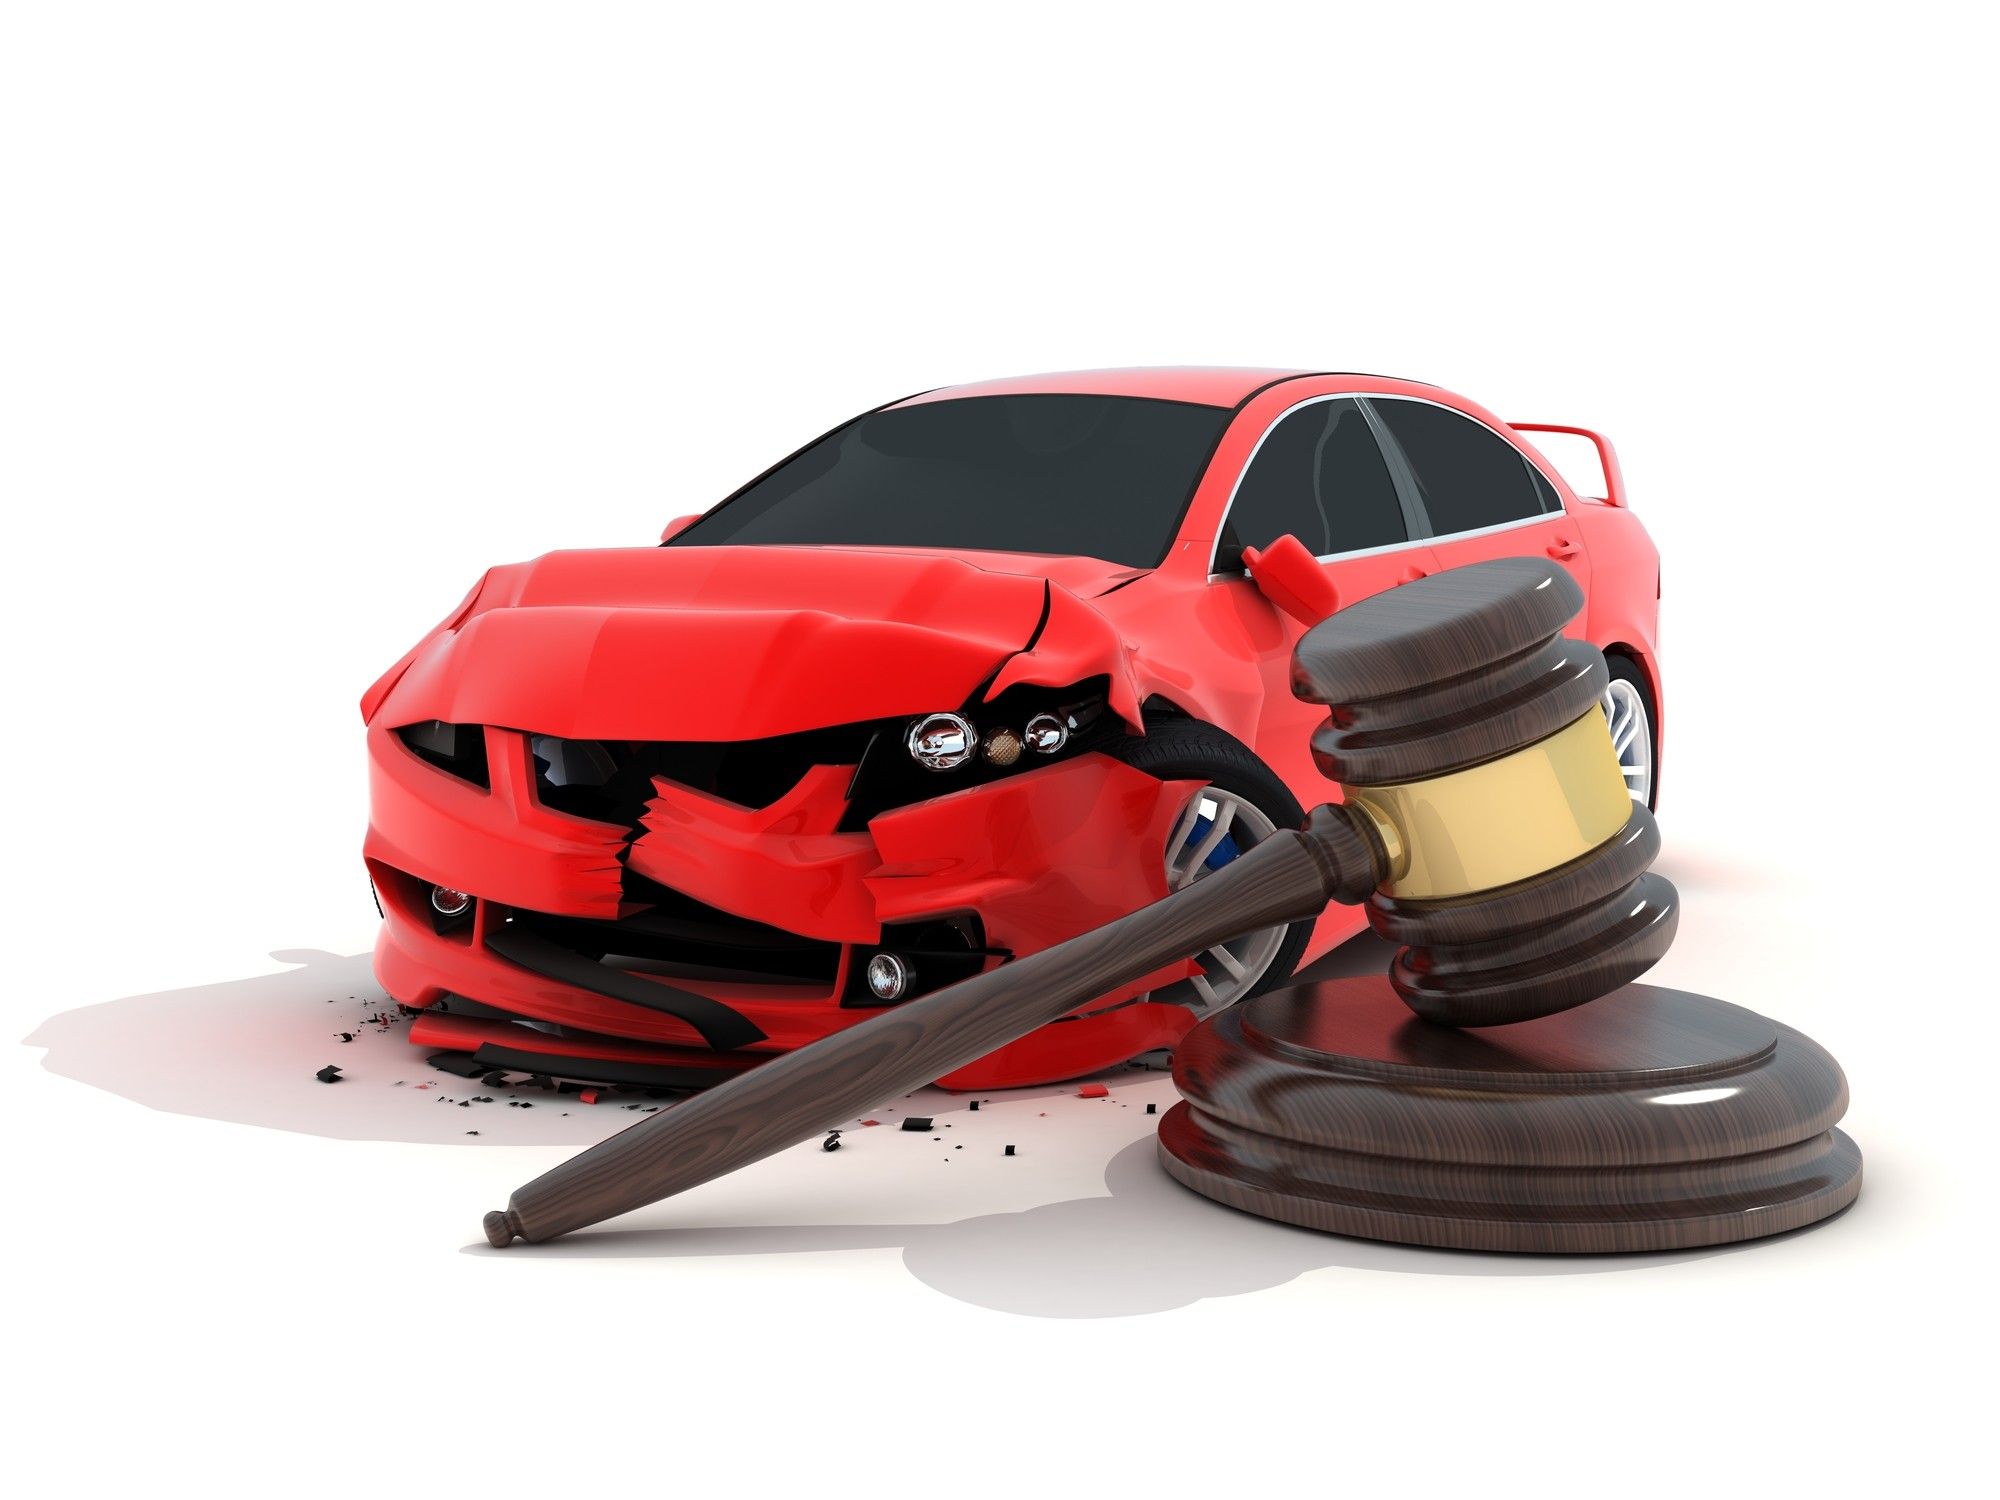 Car accident settlement can be pursued with the help of a lawyer